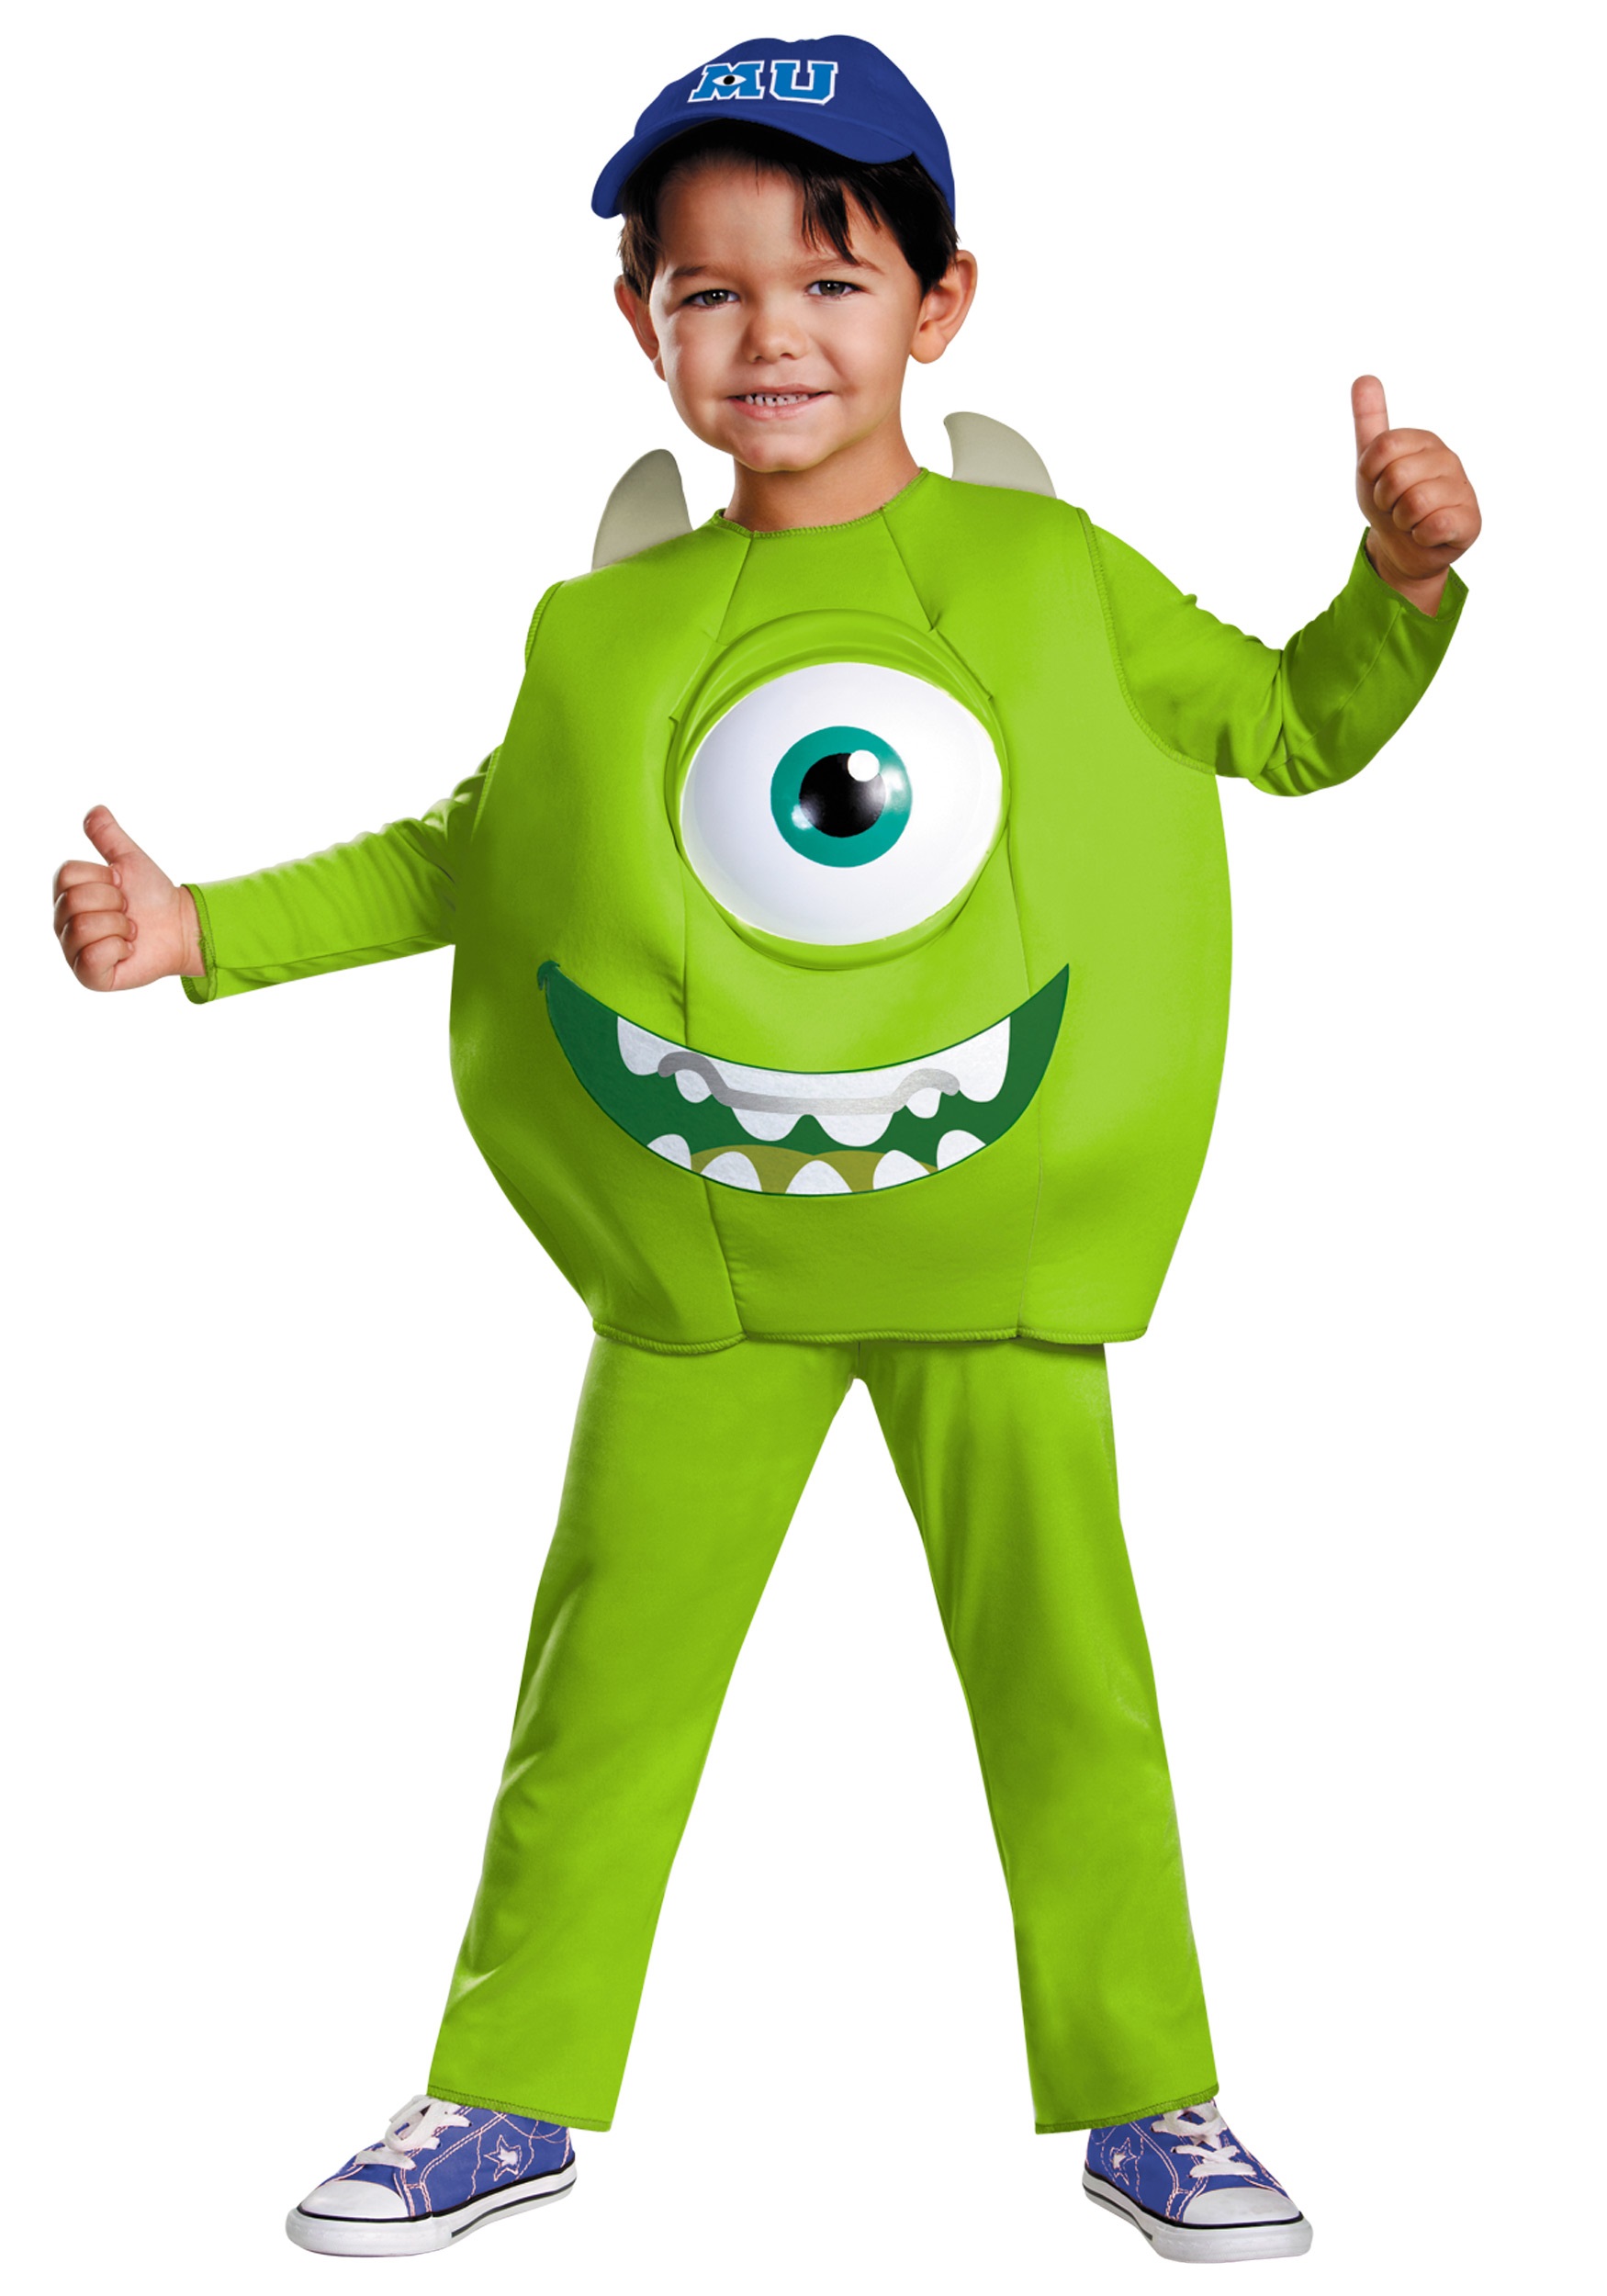 Mike Toddler Deluxe Costume